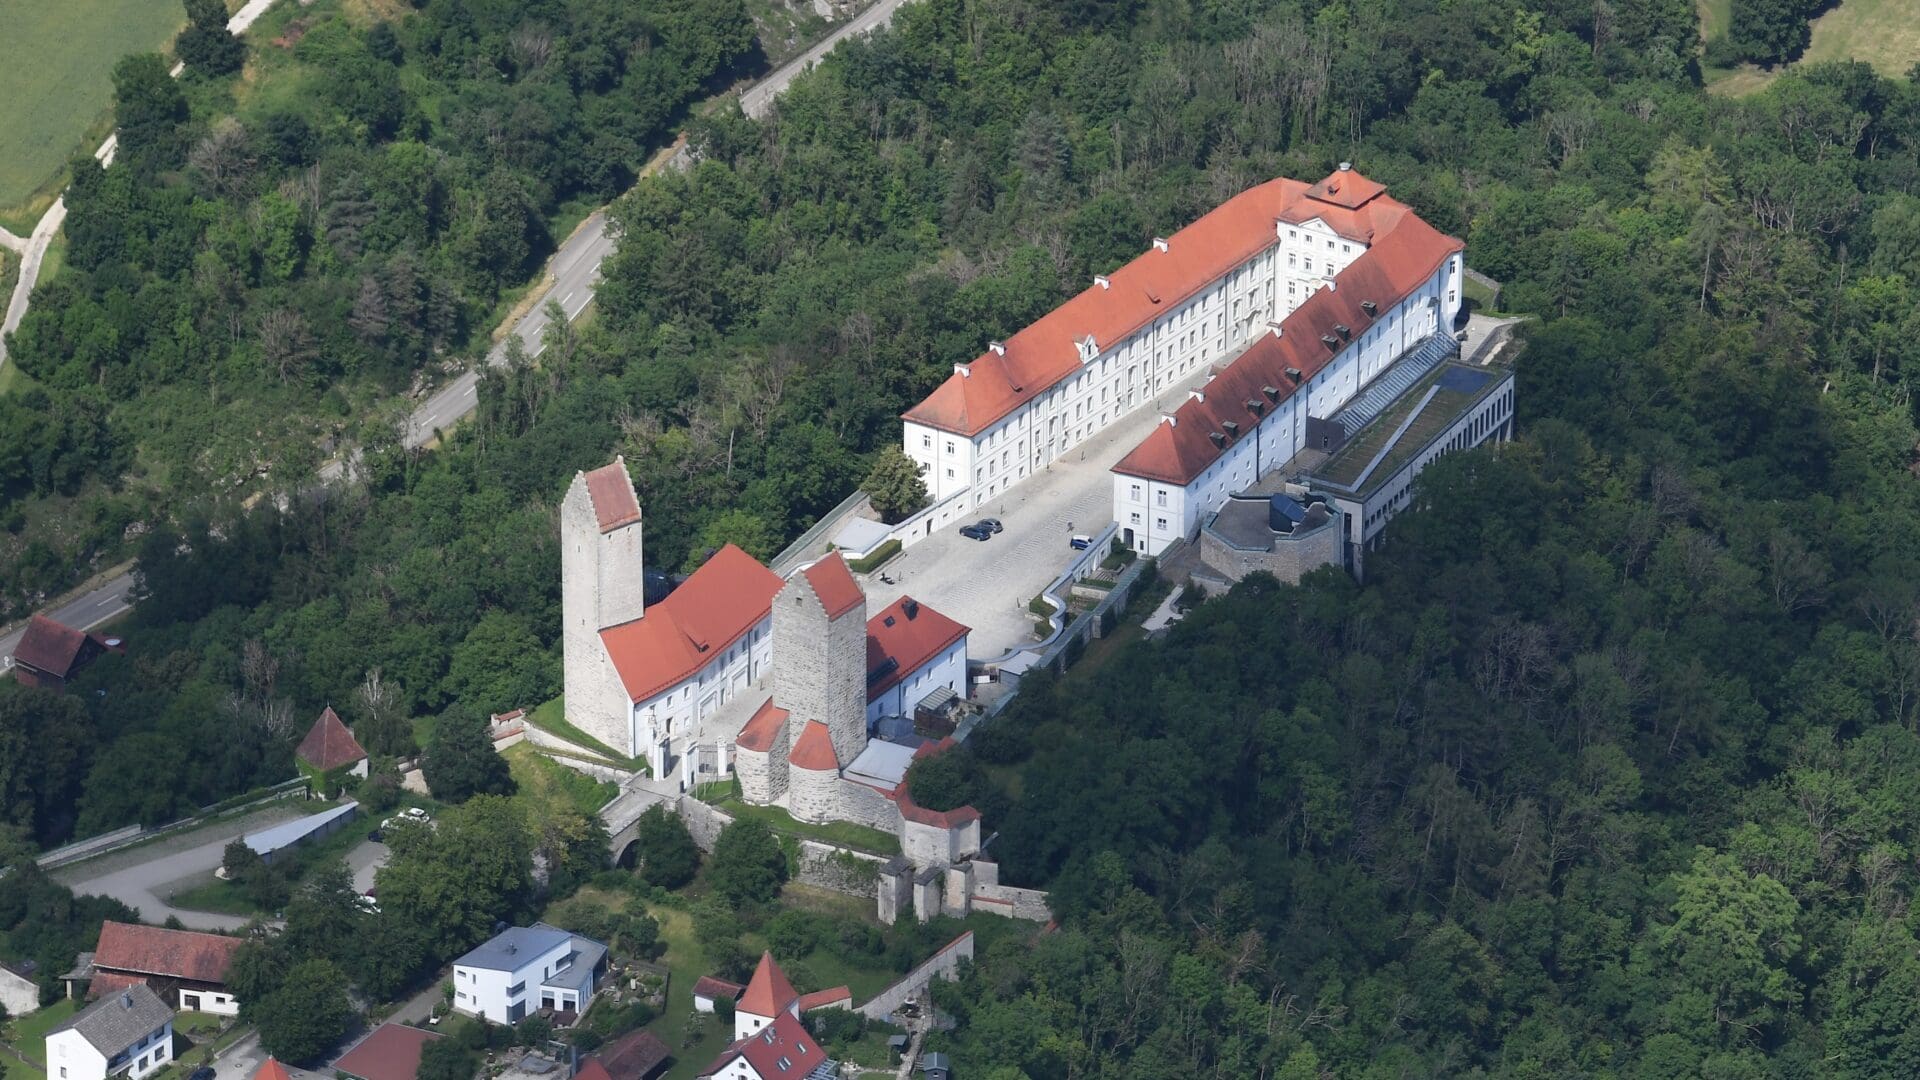 Aerial image of the Hirschberg Castle